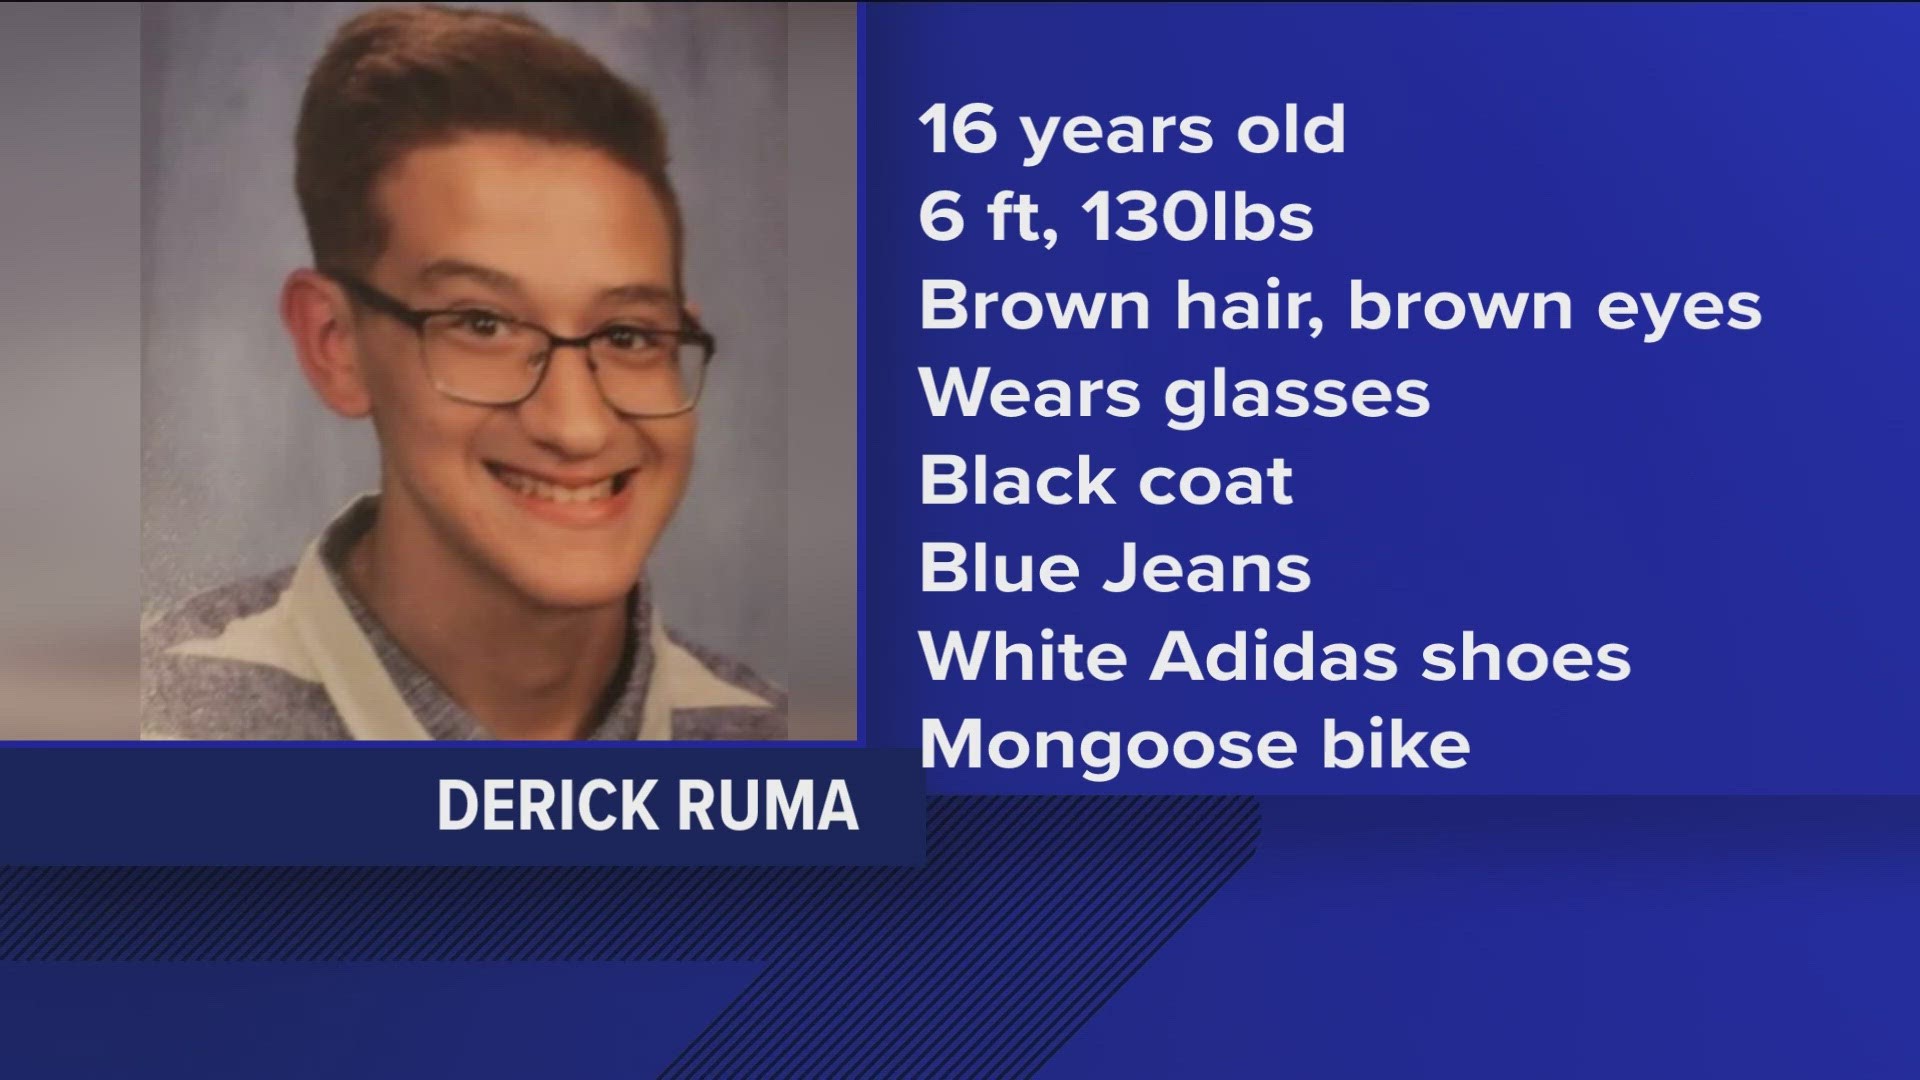 Anyone who can assist in finding Derick Ruma is asked to call Detective Collins at 419-885-8909 during normal business hours. After hours, call 419-885-8902.